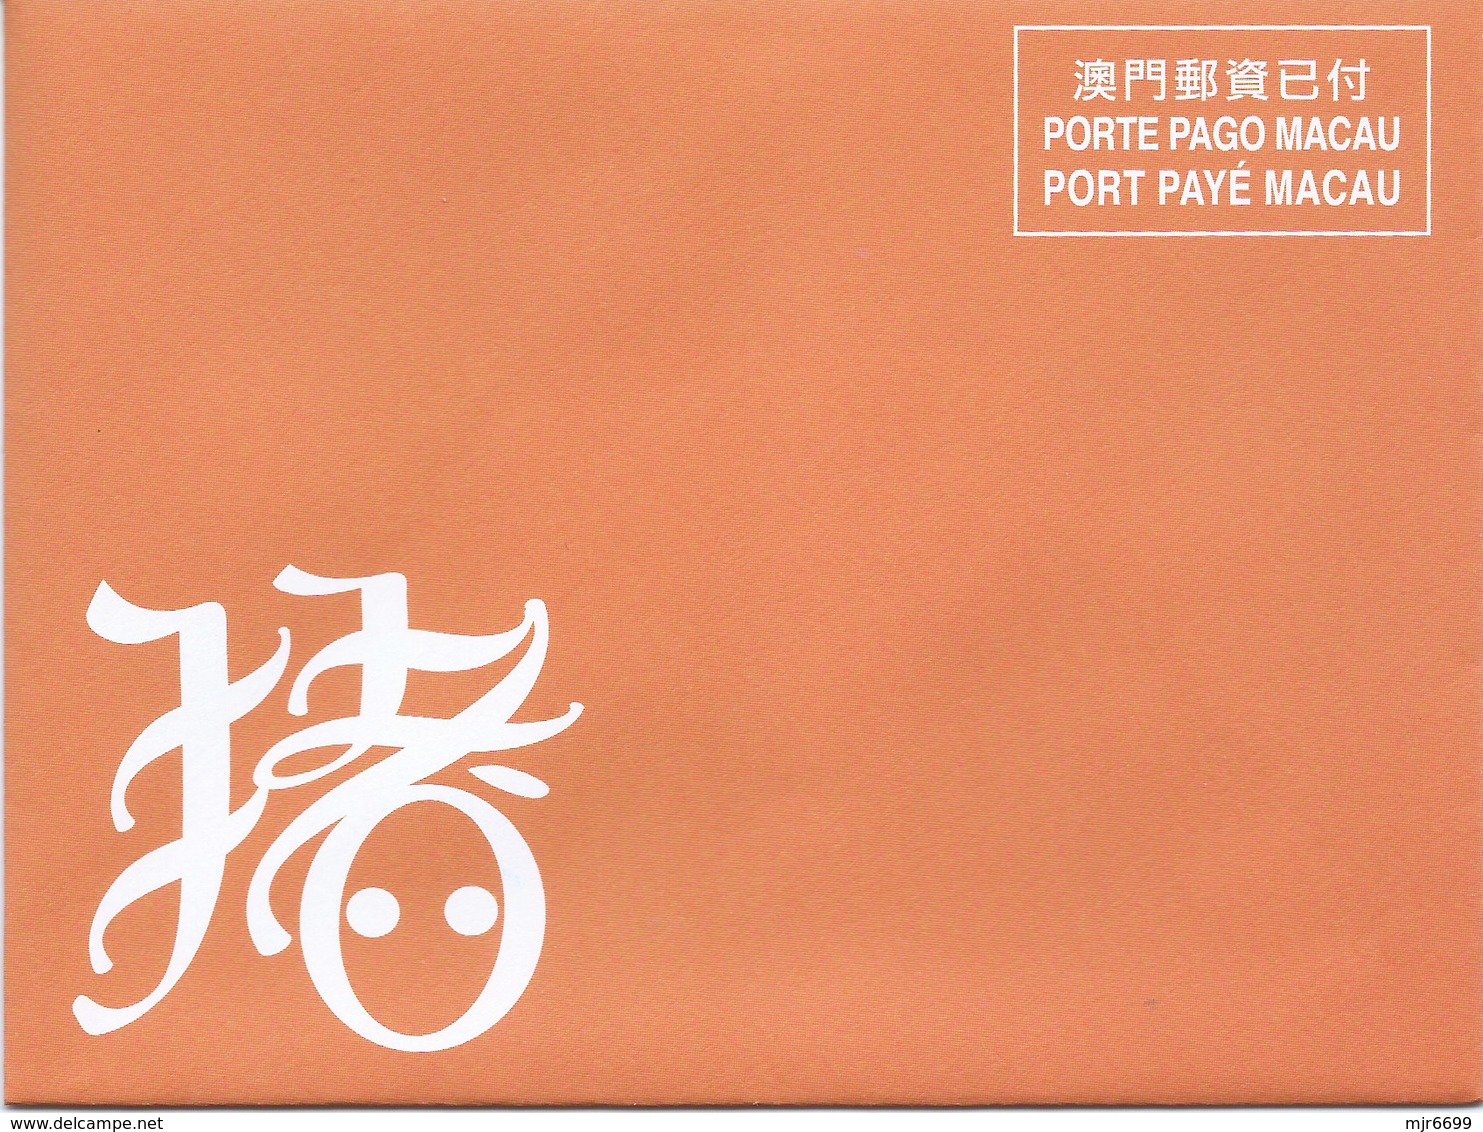 MACAU 2019 LUNAR YEAR OF THE PIG GREETING CARD & POSTAGE PAID COVER - Postal Stationery